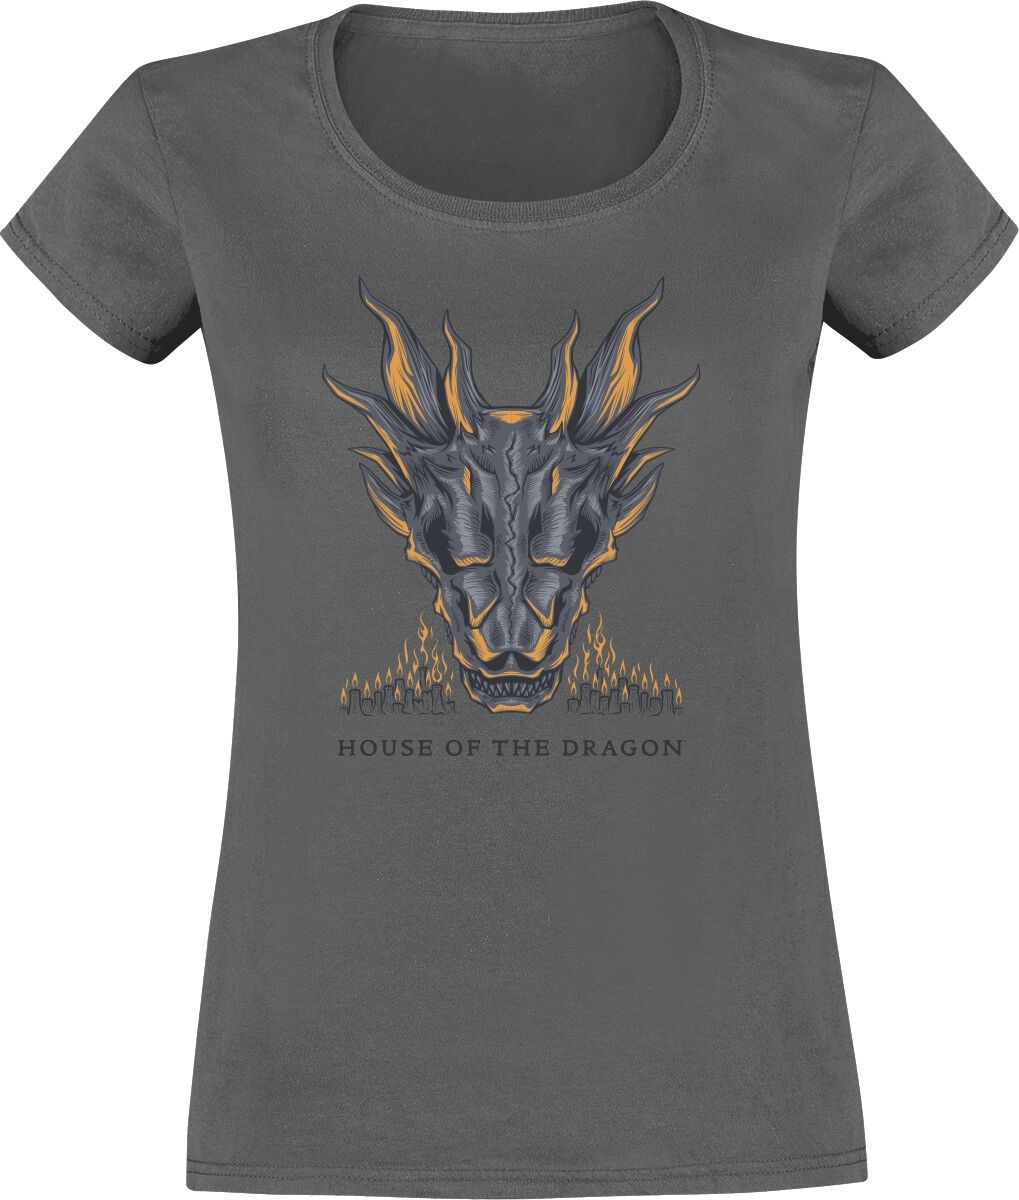 Game of Thrones House of the Dragon - Illuminated T-Shirt grey